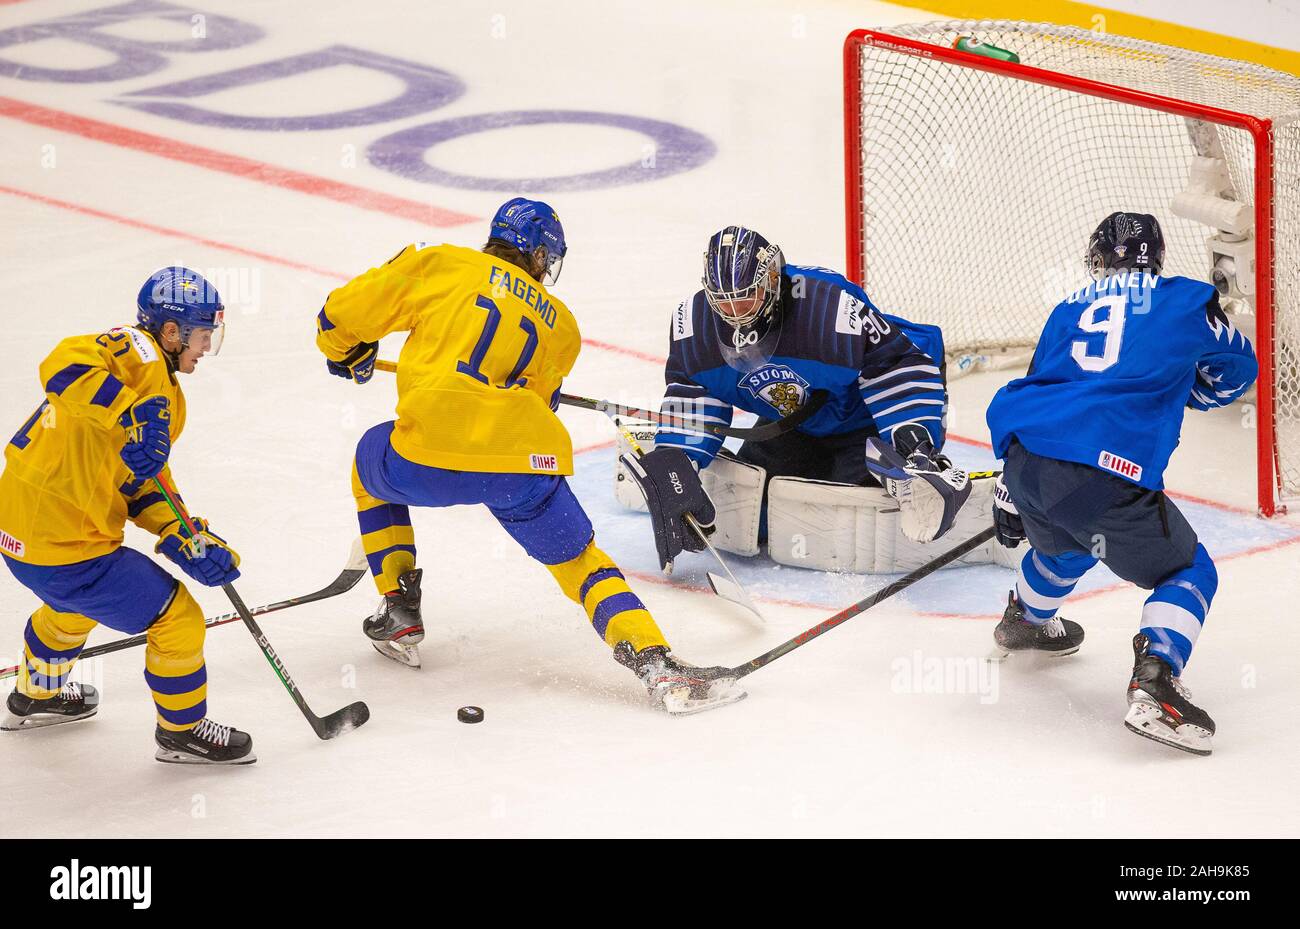 L-R Nils Hoglander and Samuel Fagemo (both SWE) and goalkeeper Justus Annunen and Toni Utunen (both FIN) in action during the 2020 IIHF World Junior I Stock Photo